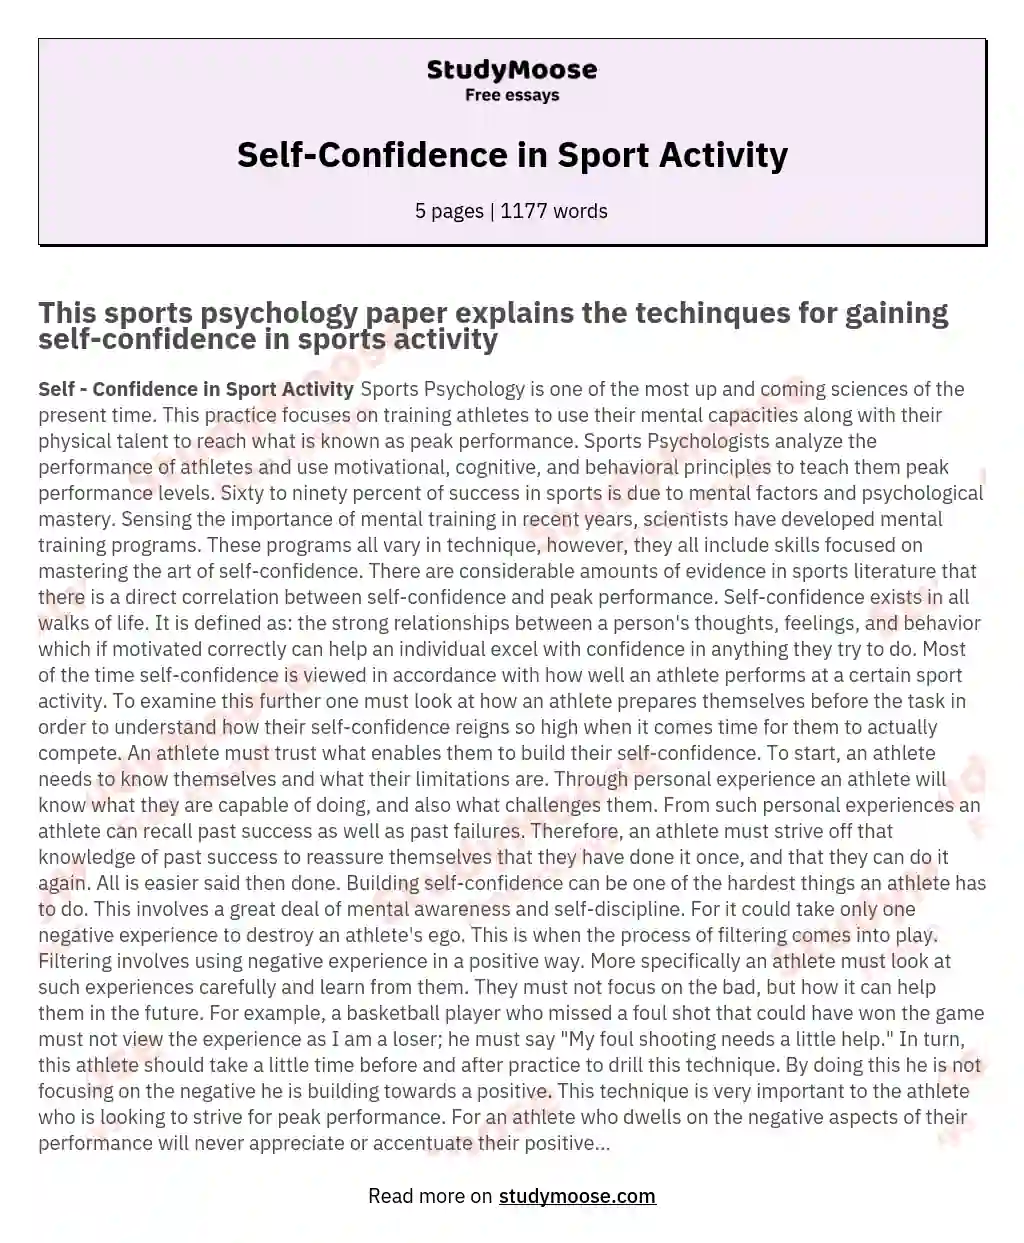 Self-Confidence in Sport Activity